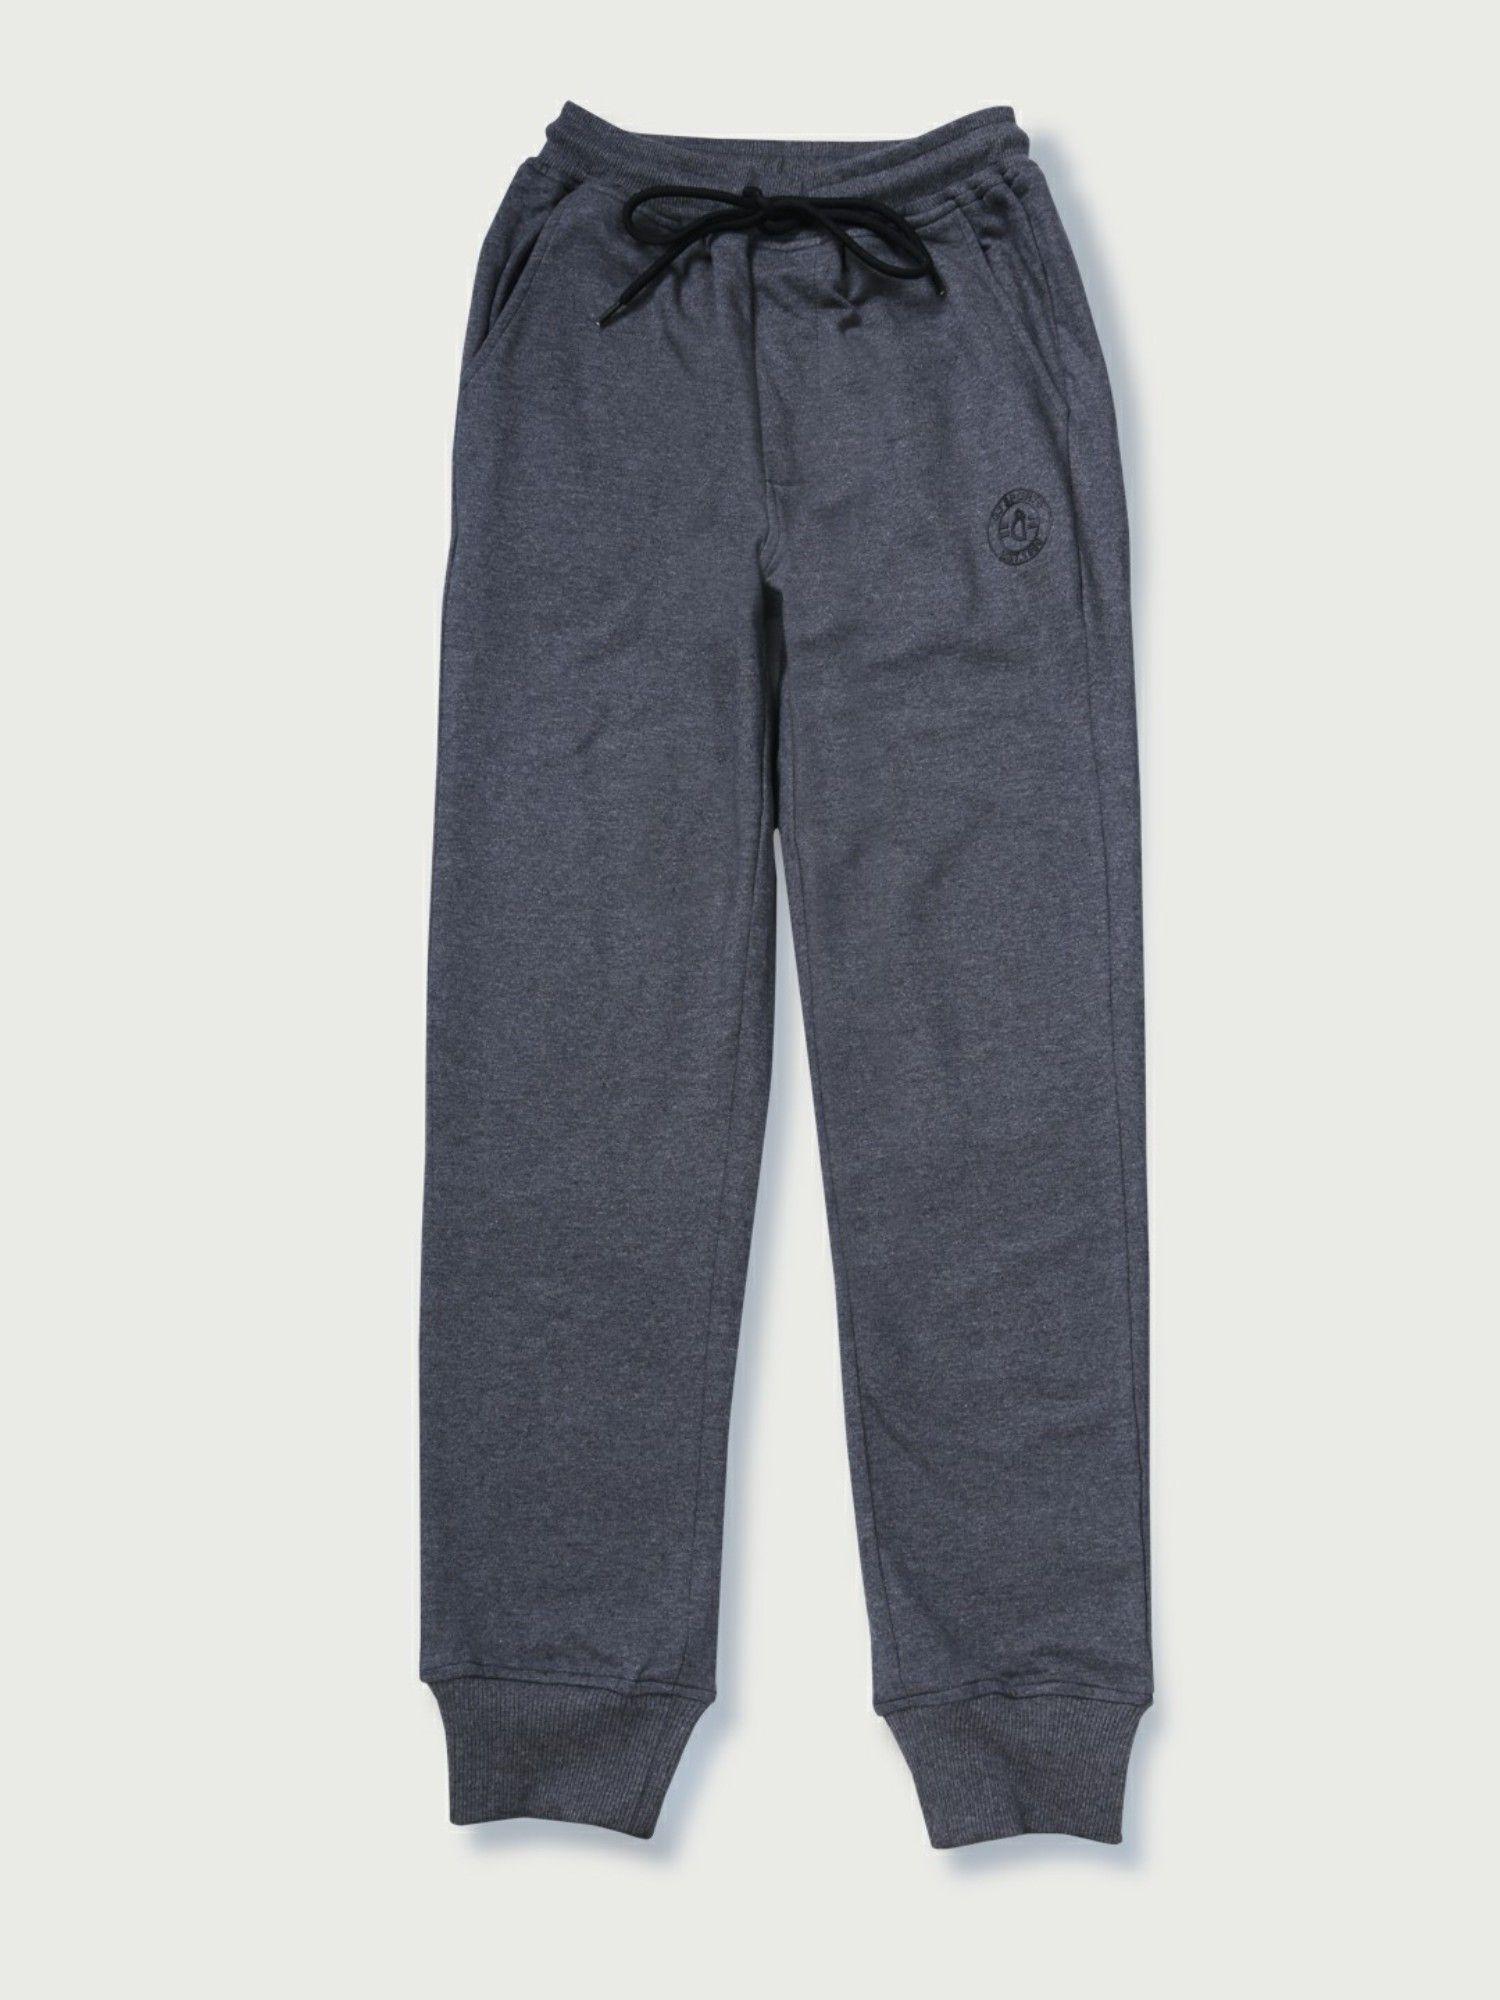 boys grey knitted solid track pant